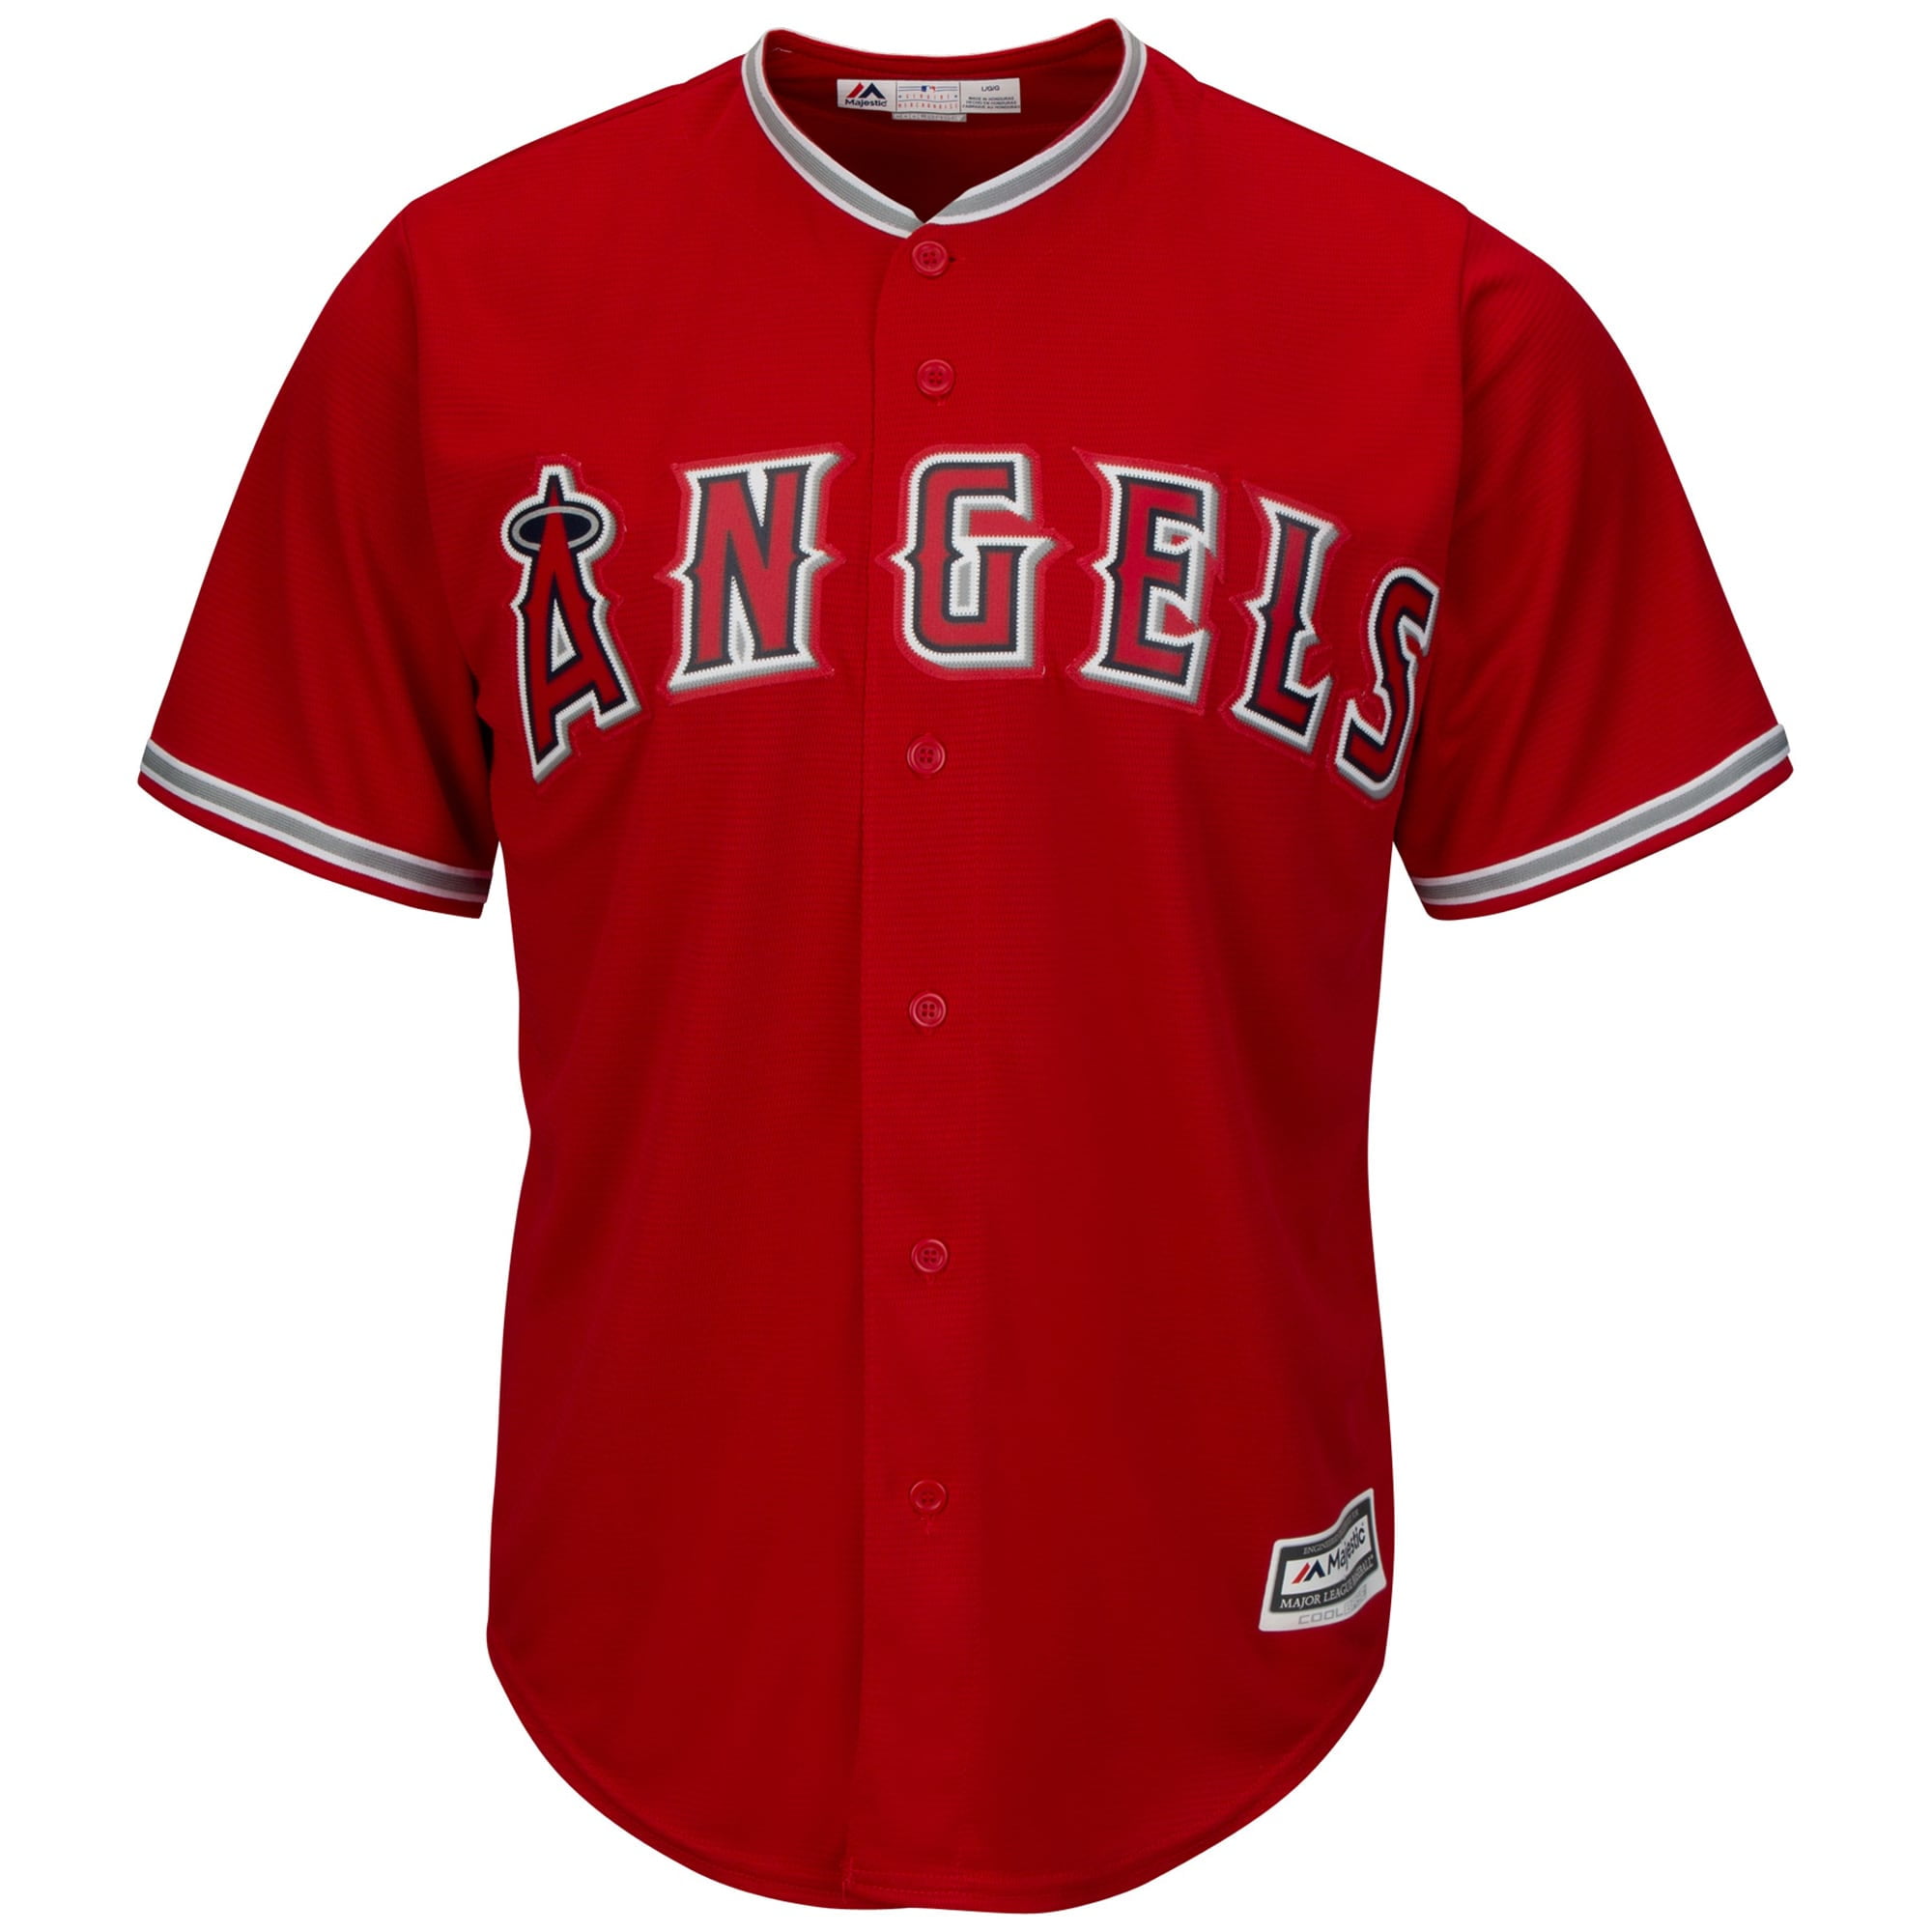 mike trout kids jersey